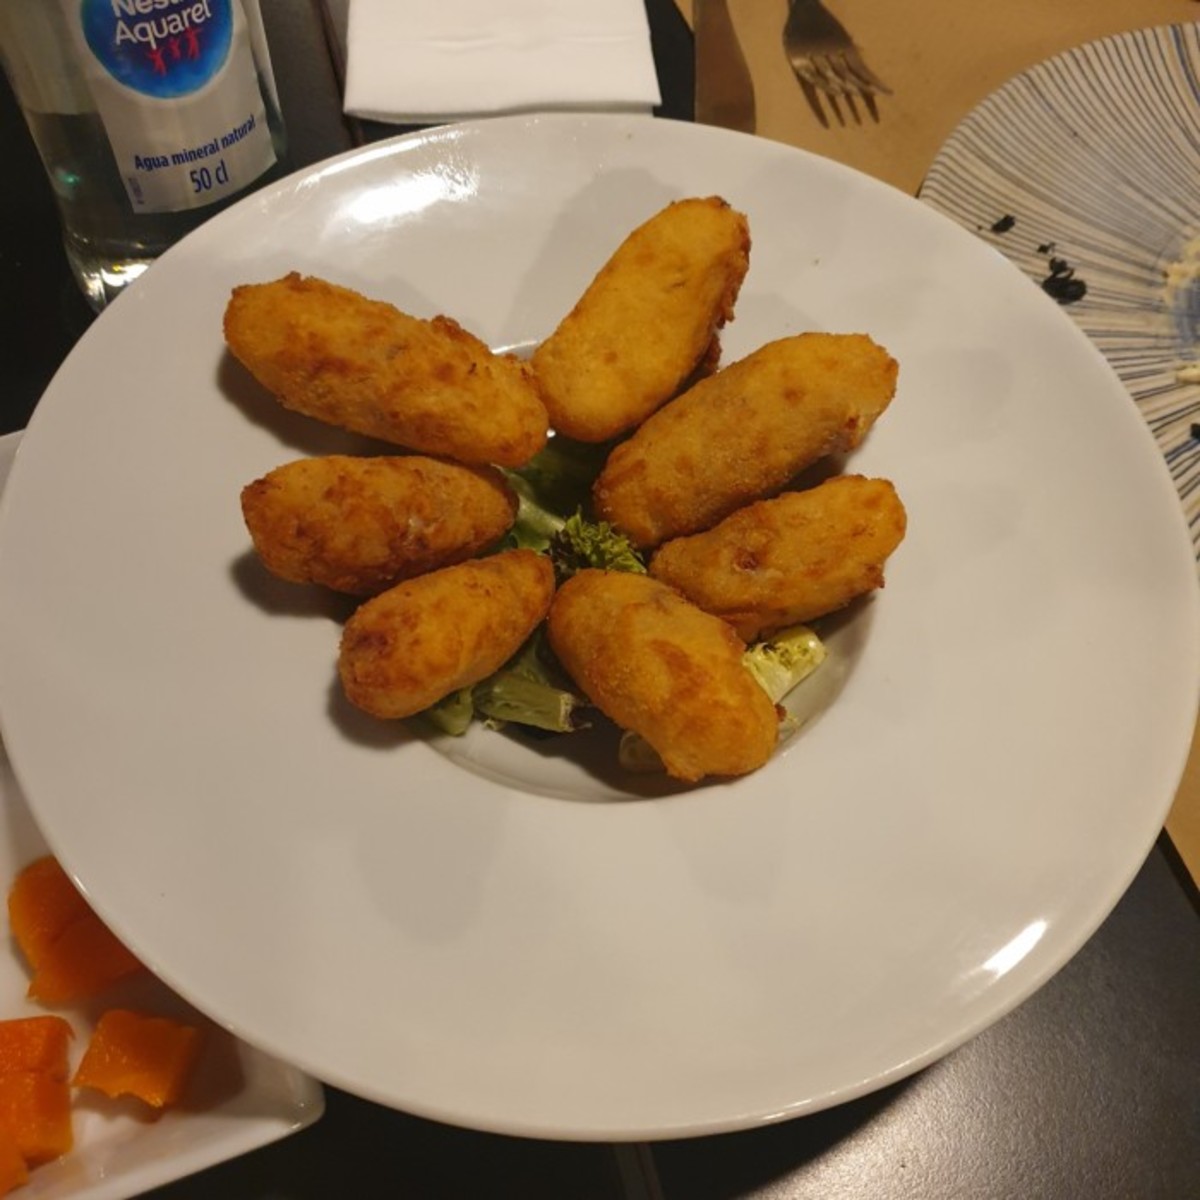 I was quite sure I had more pics from that night, but apparently, I only cared about croquetas!! They were awesome, highly recommended!